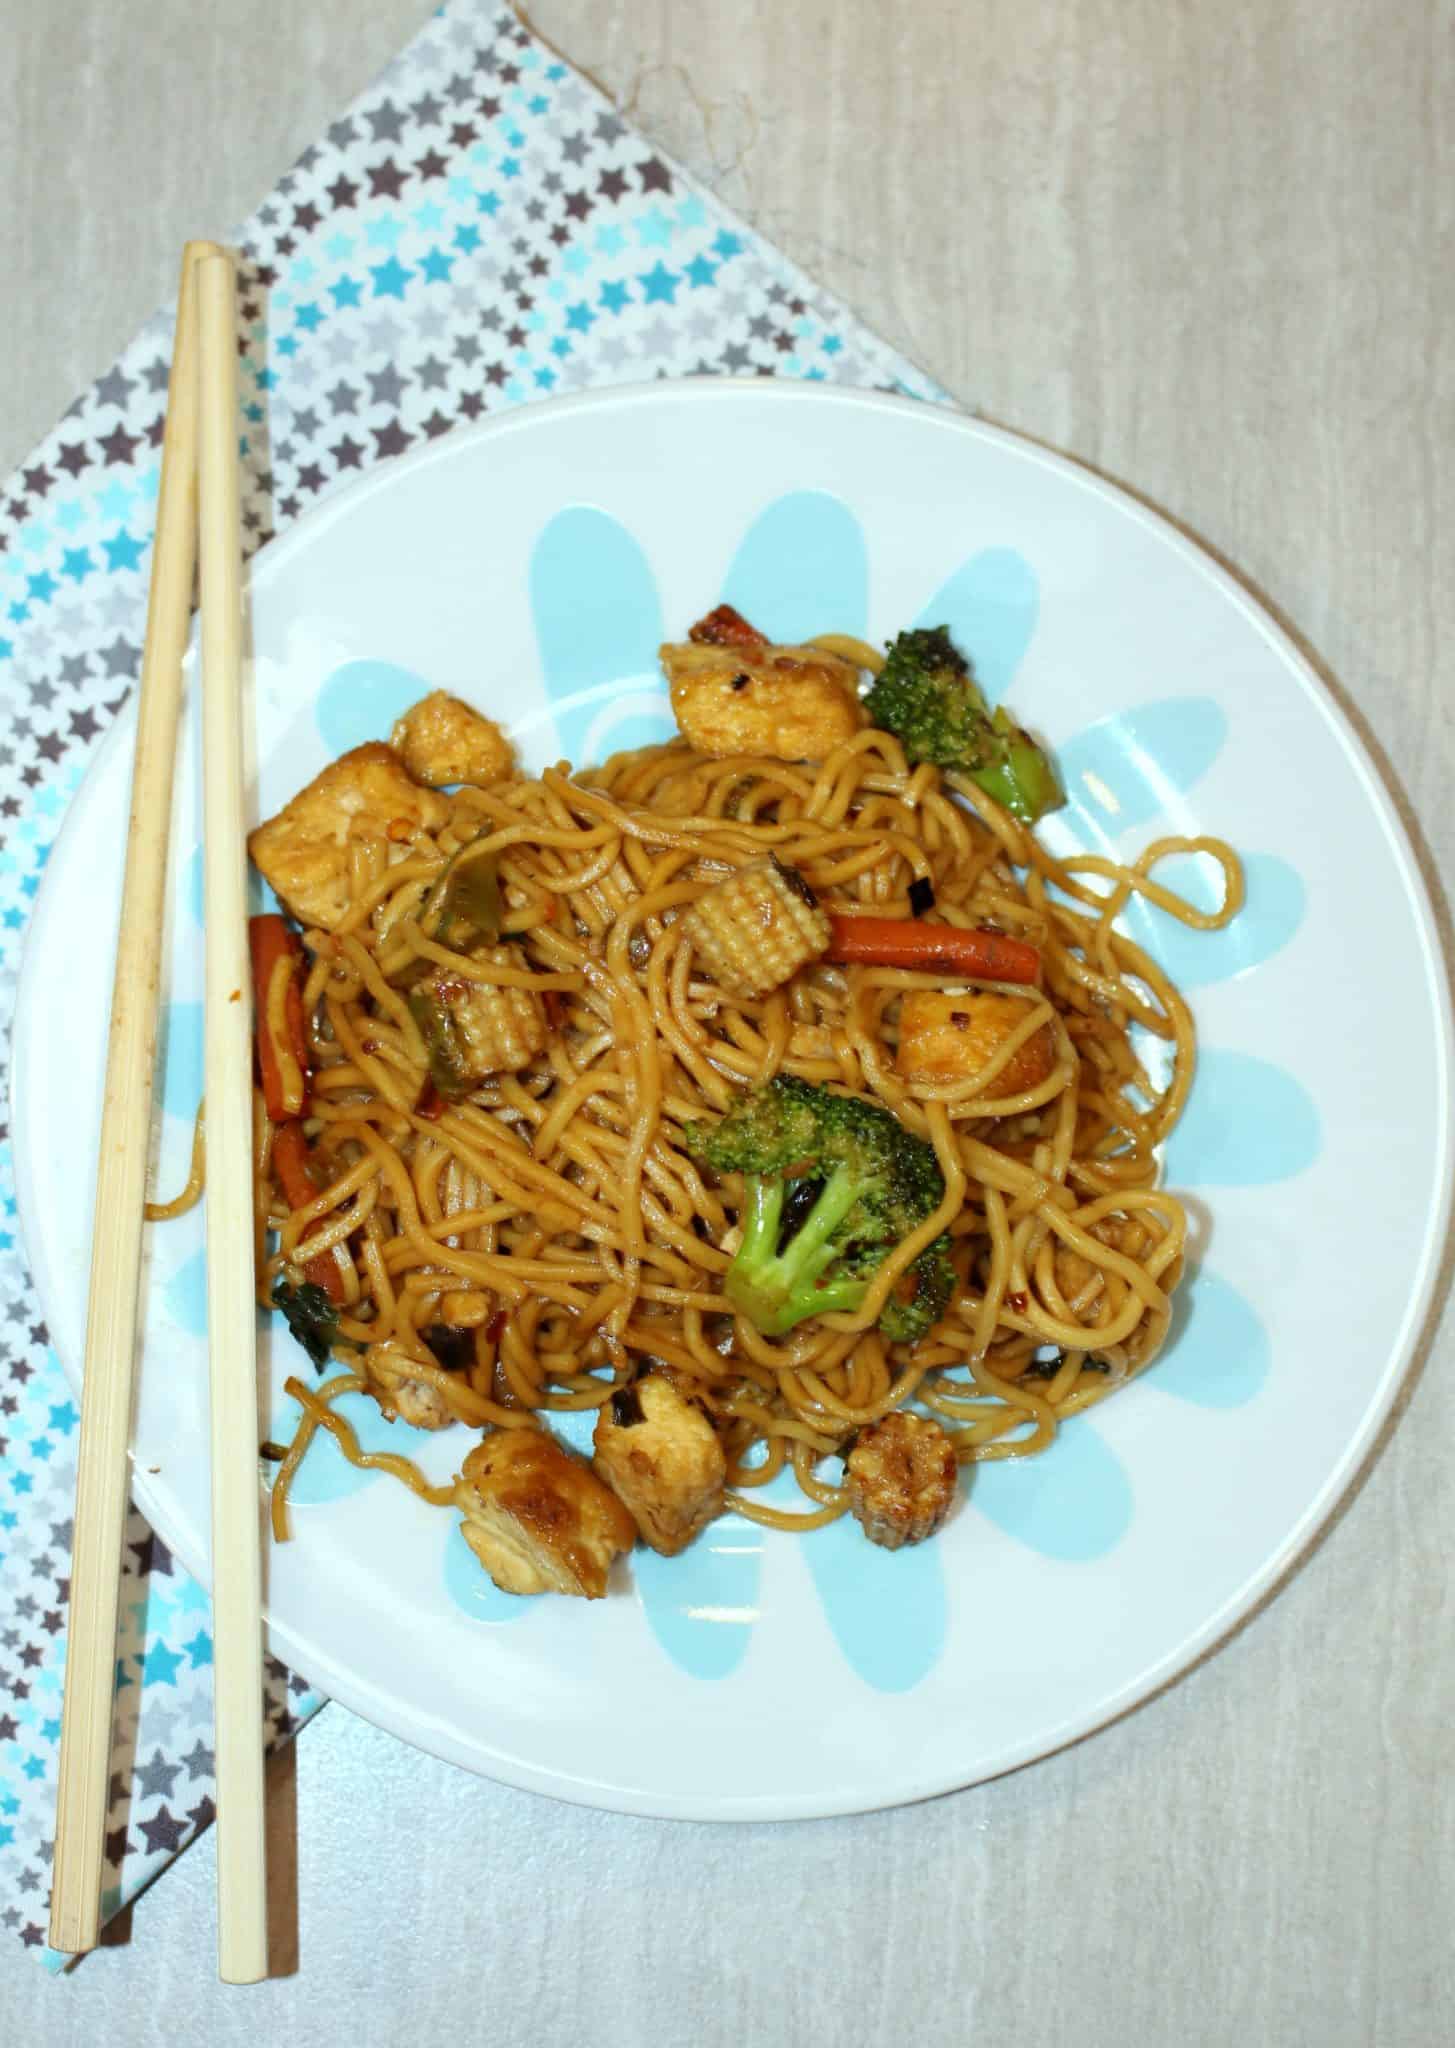 Vegetable Lo Mein - Chinese Vegetable and Tofu Lo Mein in a Plate with chopstick